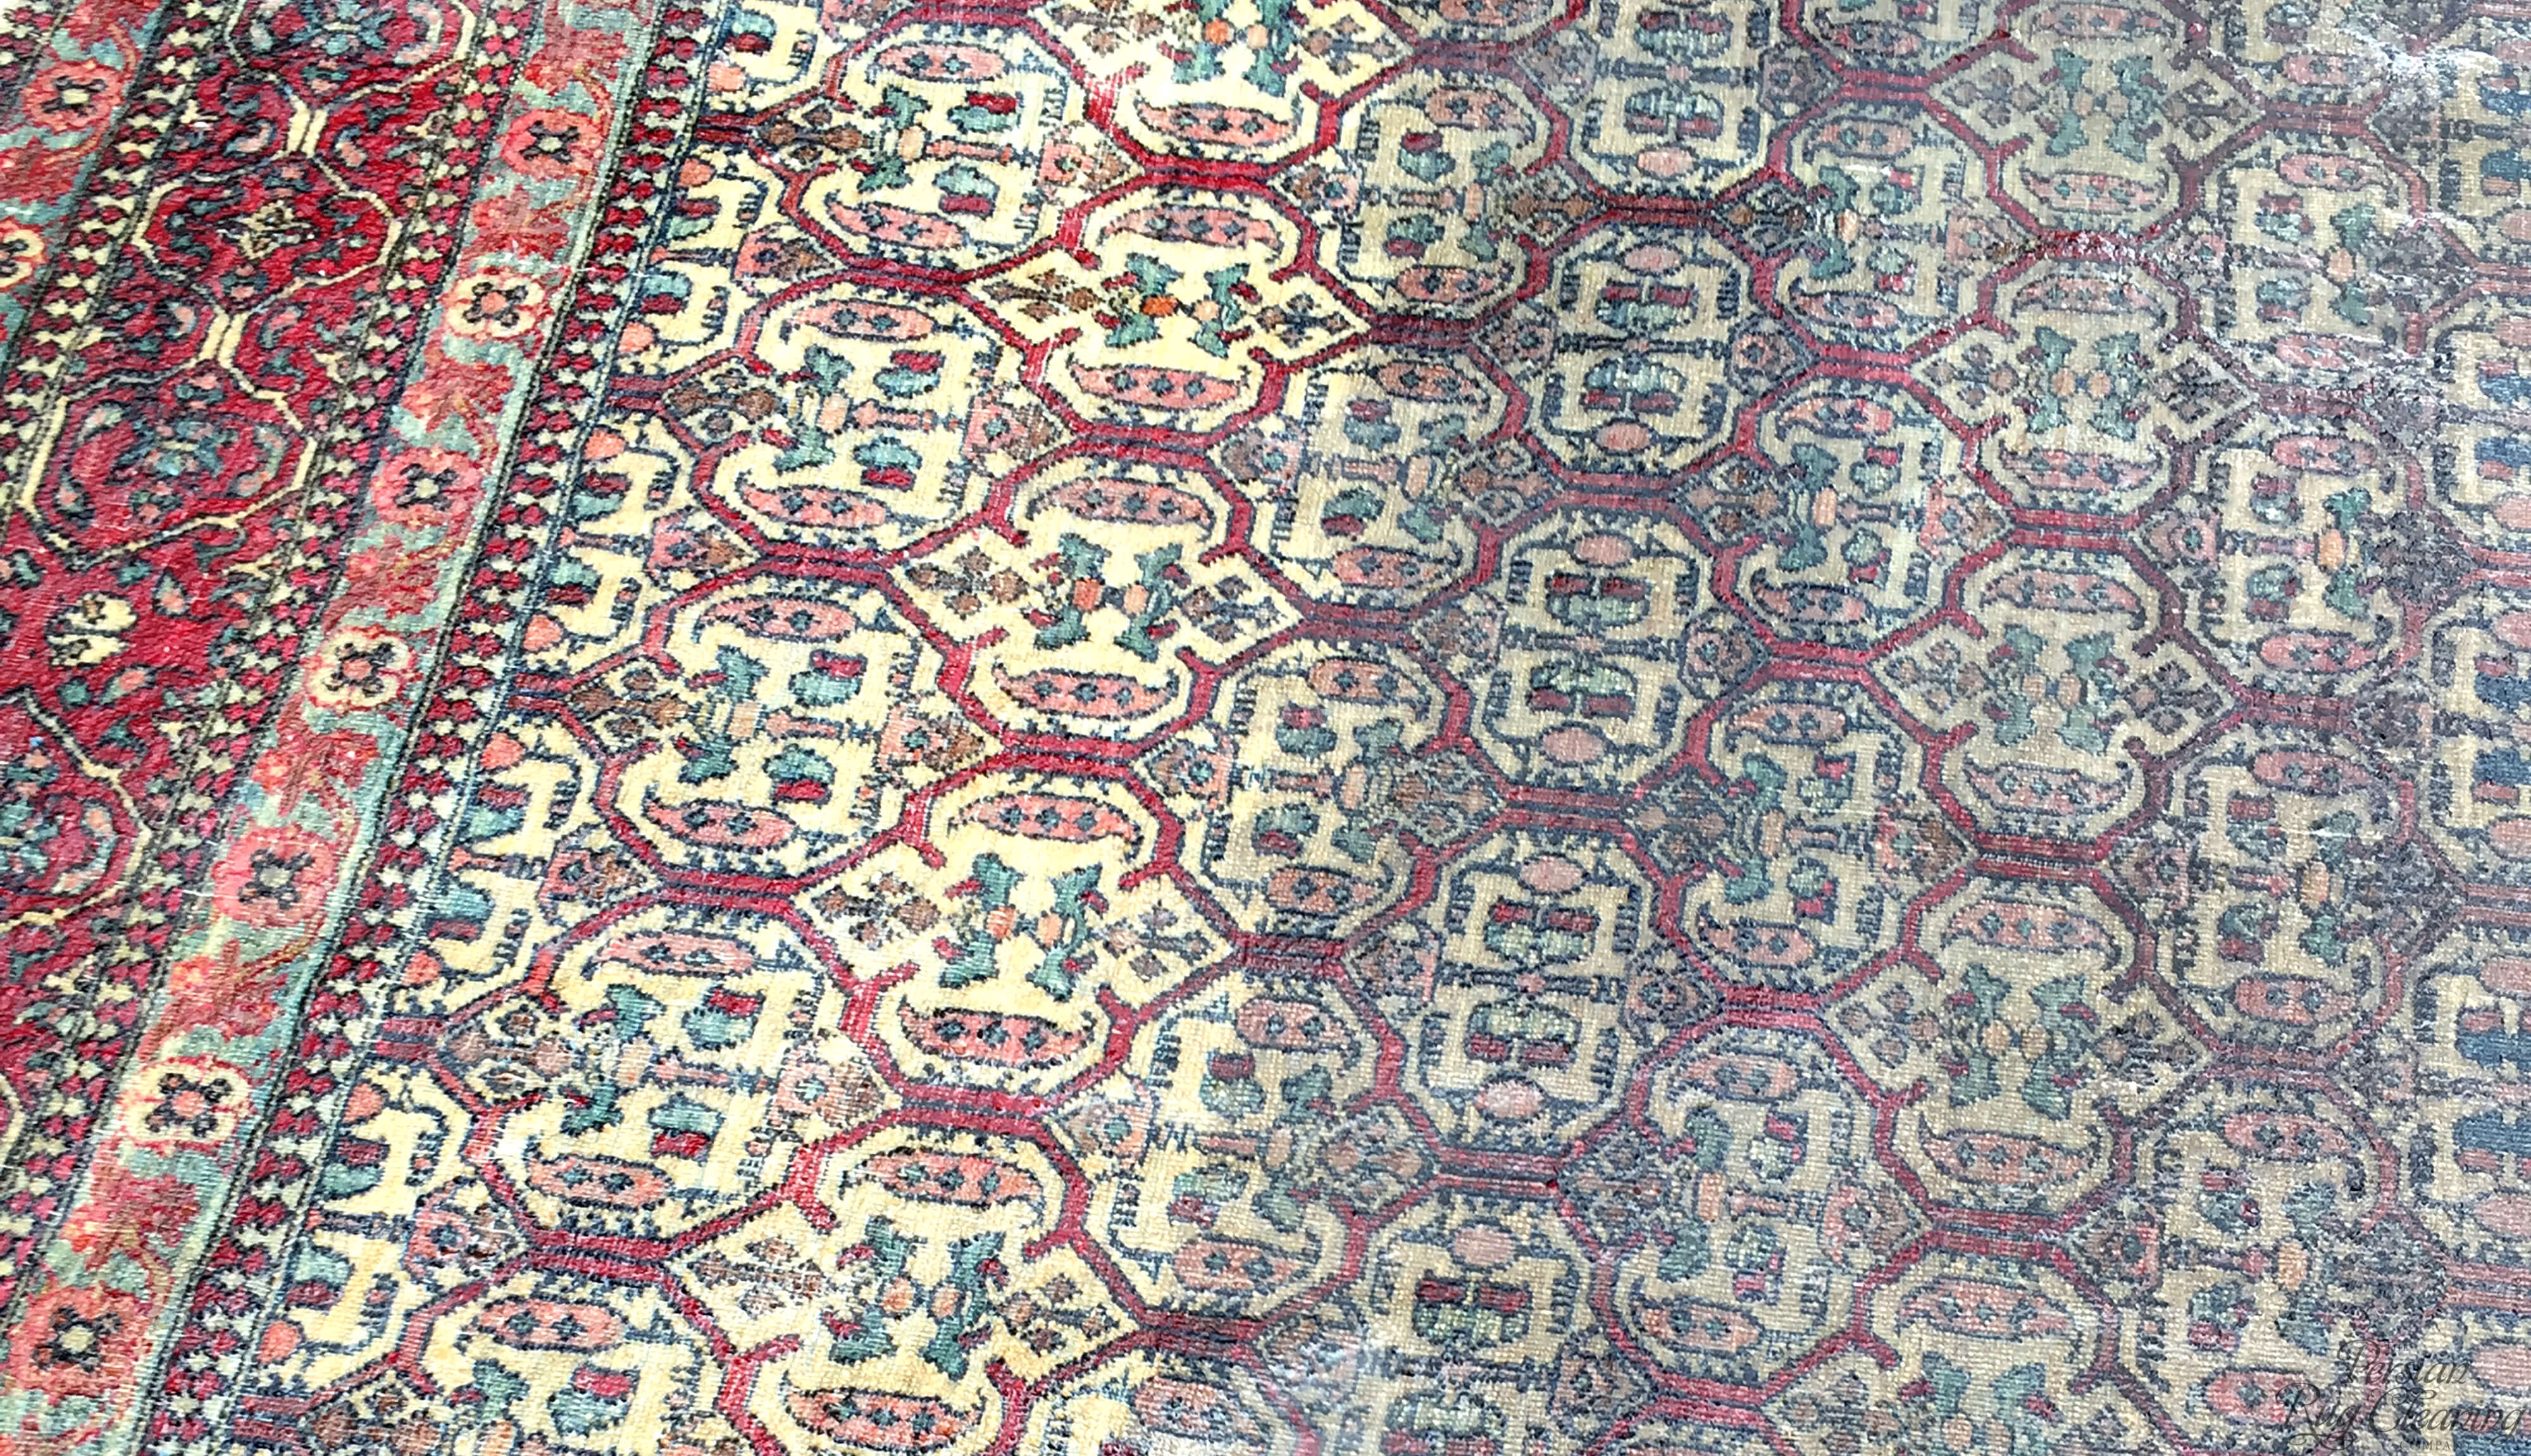 Rug Cleaning London - Isfahan Rug half washed to demonstrate Before and After results